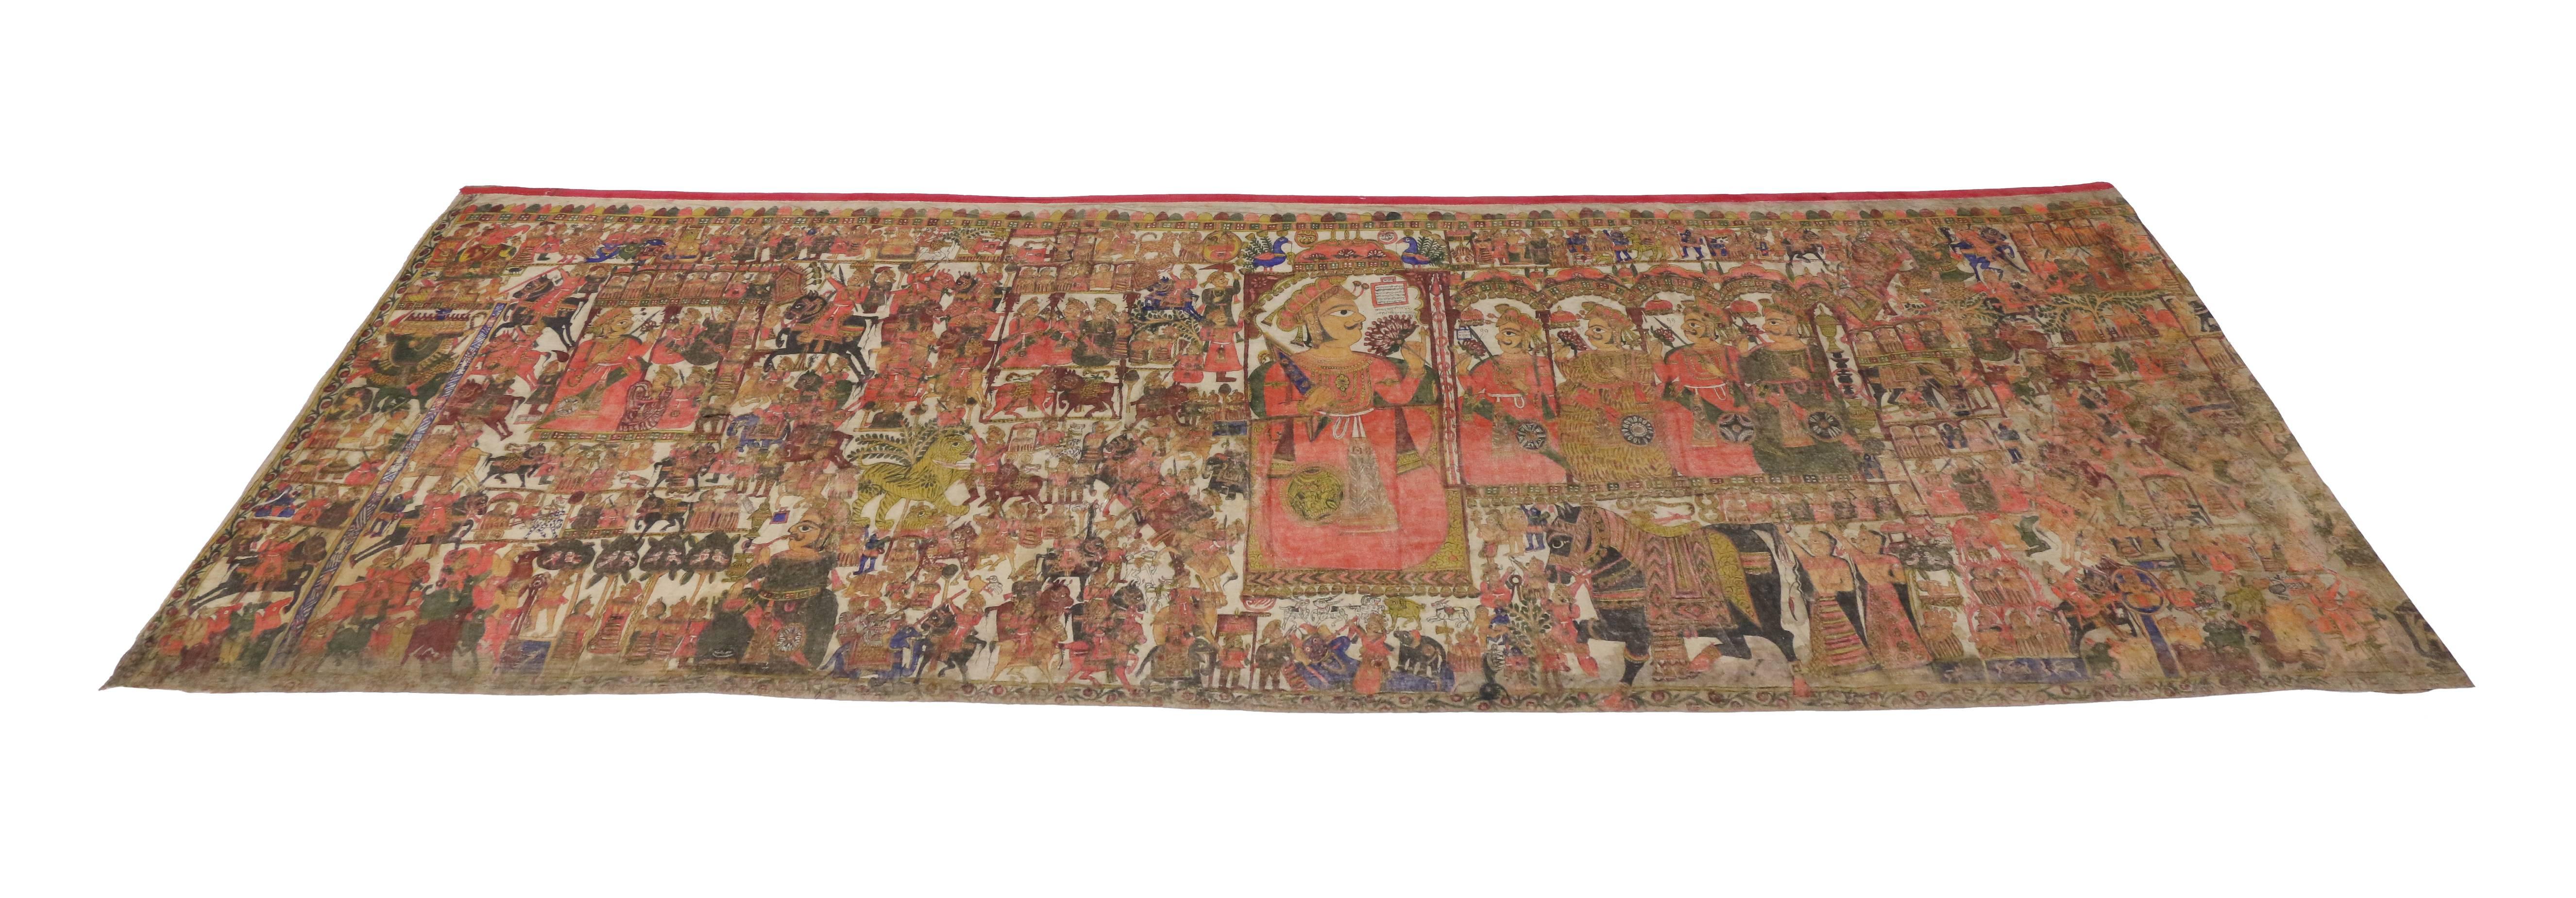 18th Century Antique Indian Medieval Tapestry after the Battle of Karnal in 1739 For Sale 4